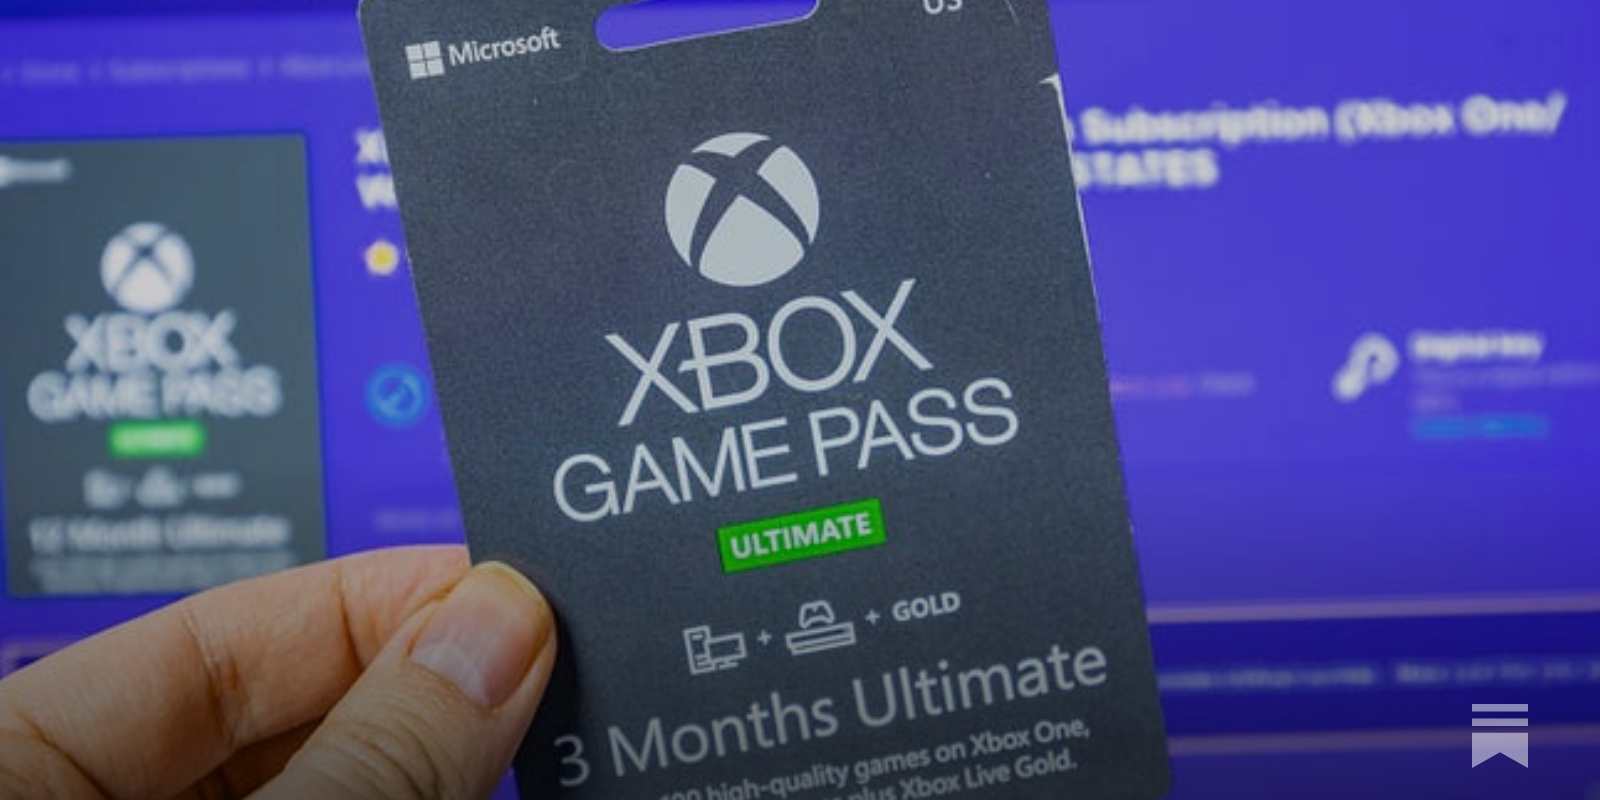 HOW TO GET THE GAMEPASS ULTIMATE PROMOTION (NO CARD) 